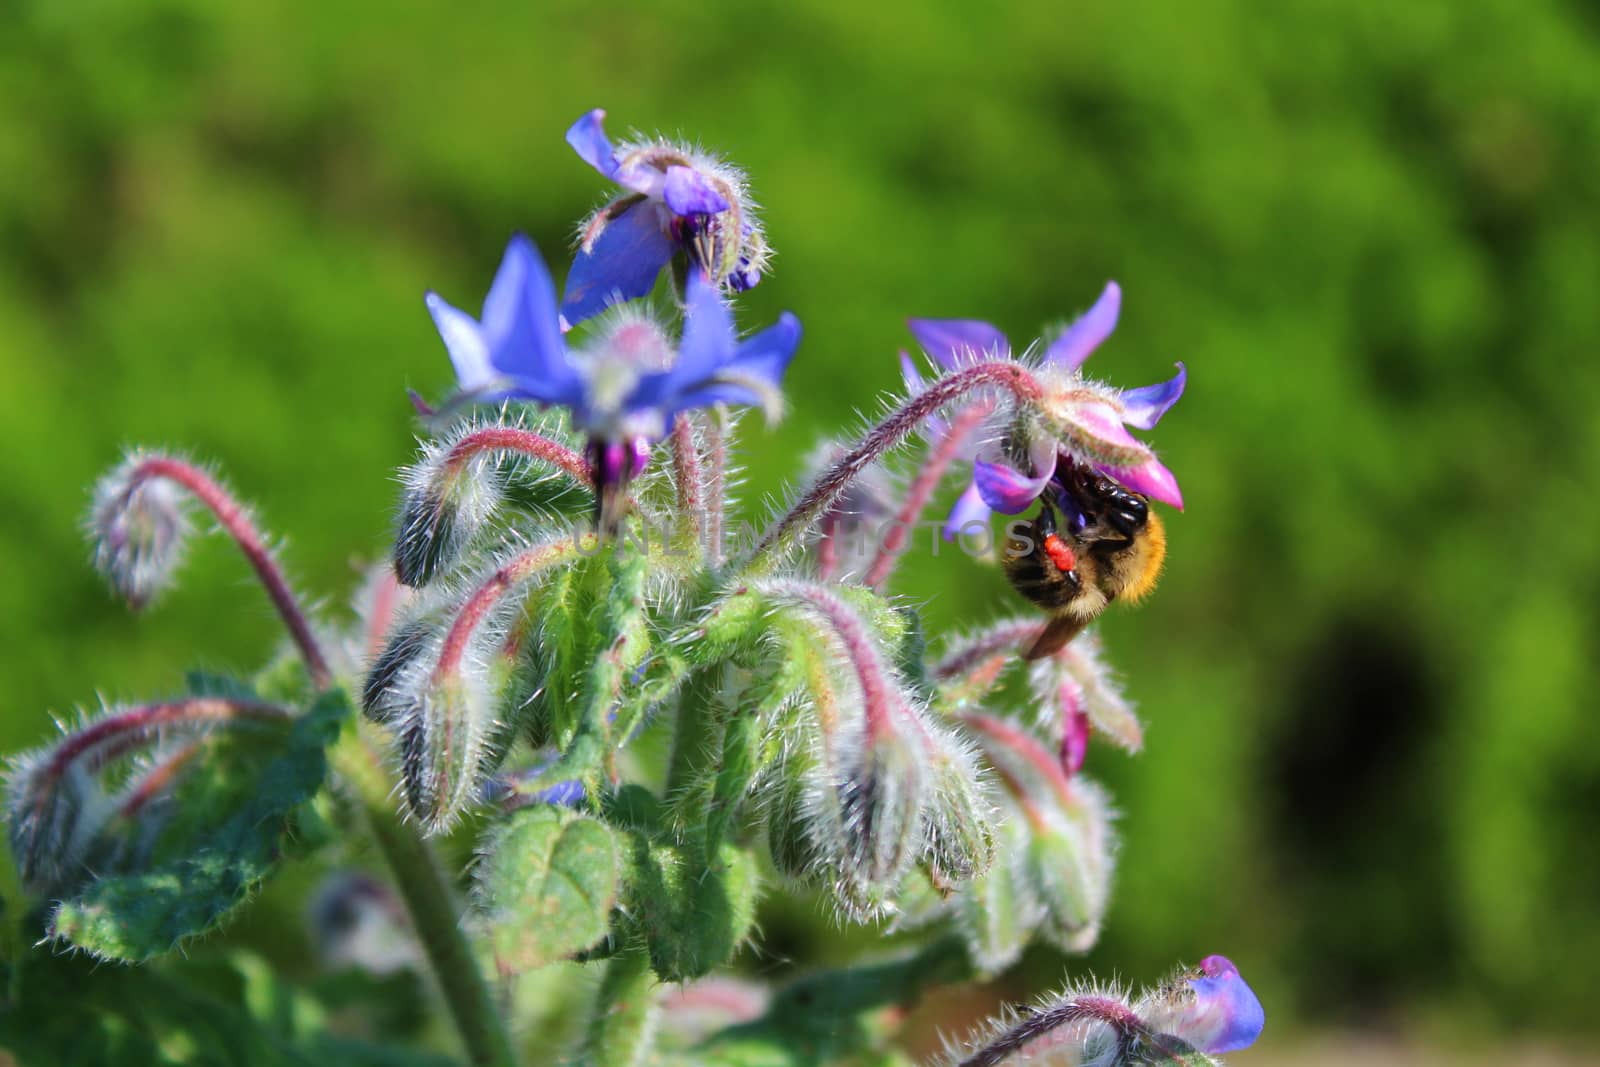 The picture shows borage blossoms in the garden